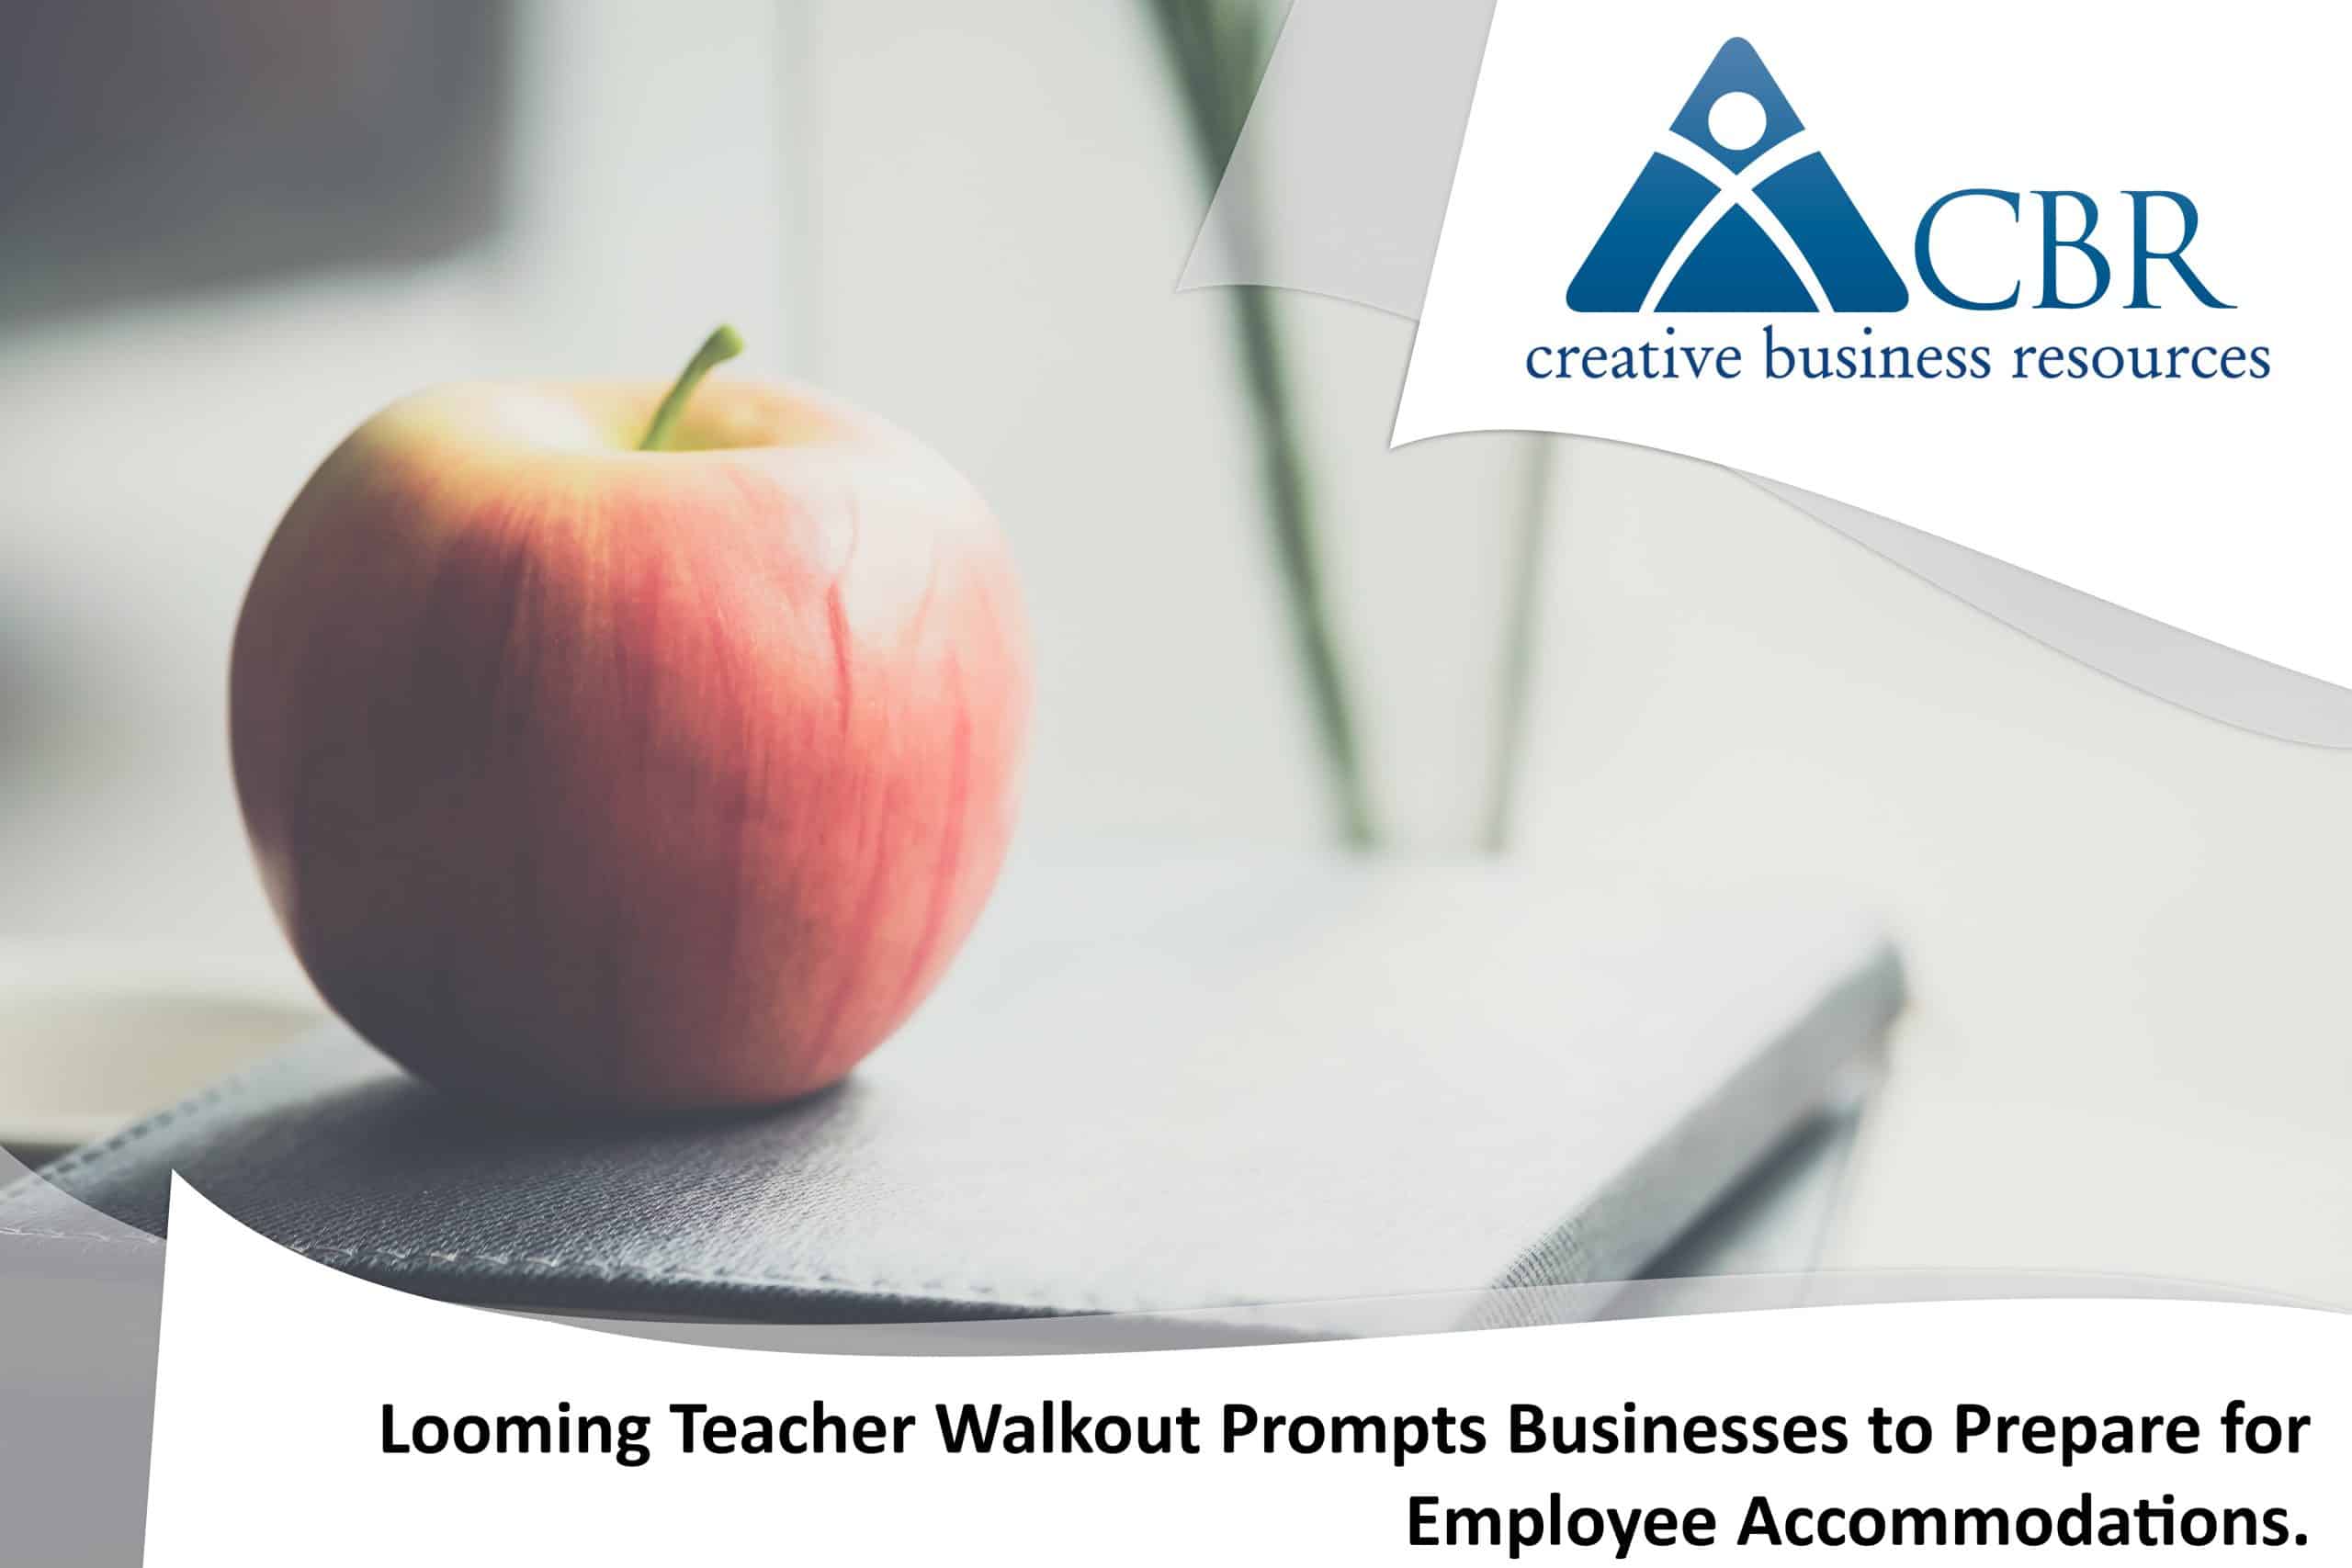 Looming Teacher Walkout Prompts Business to Prepare for Employee Accommodations